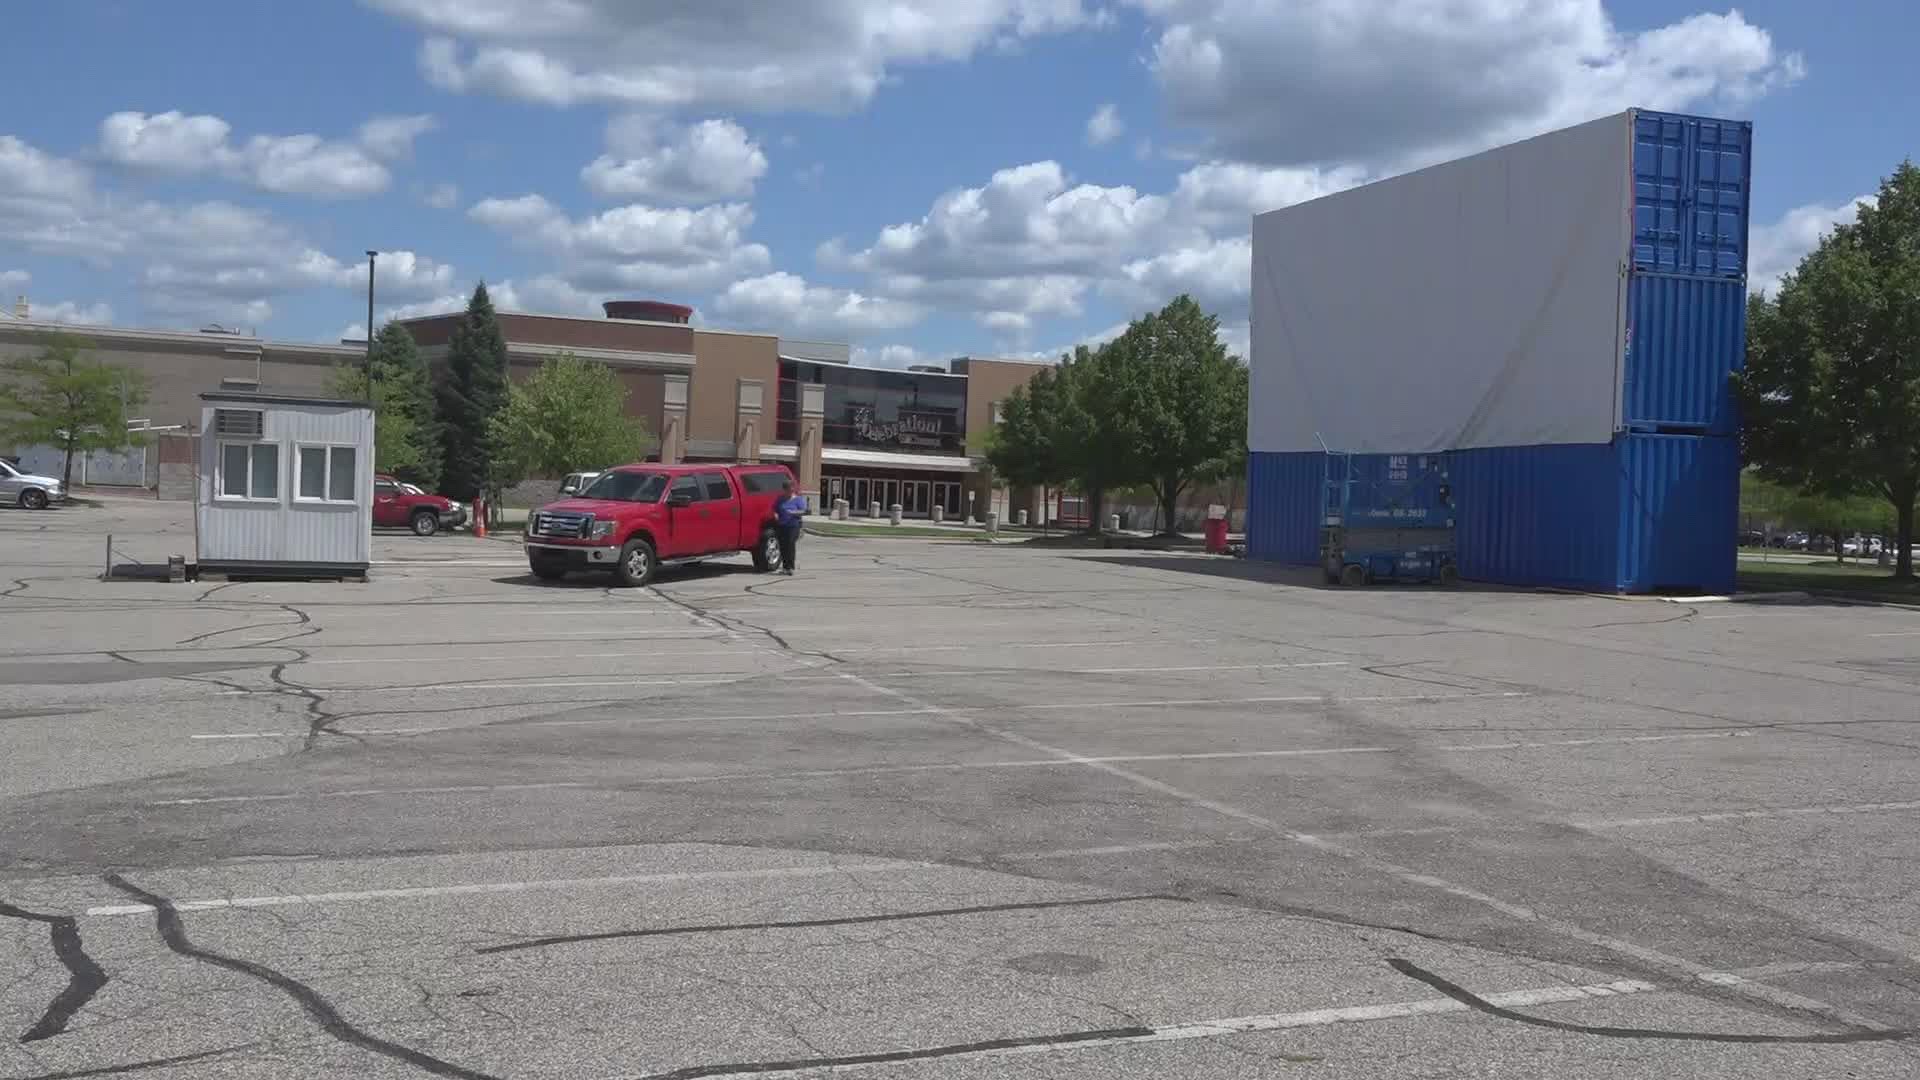 Celebration Cinema launching pop-up drive-ins in Grand Rapids